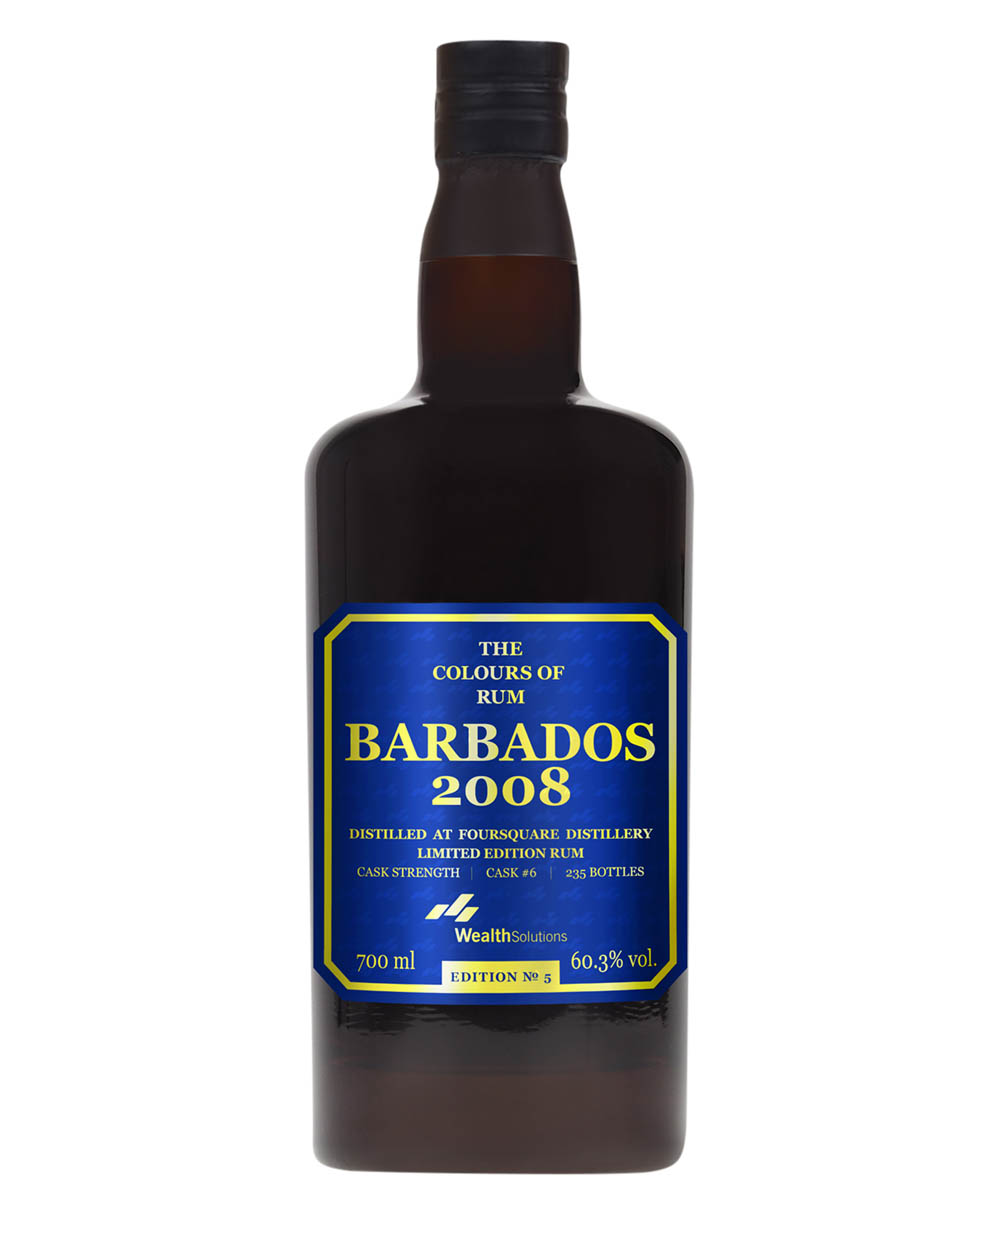 Foursquare Barbados 2008 The Colours Of Rum Edition 5 Musthave Malts MHM